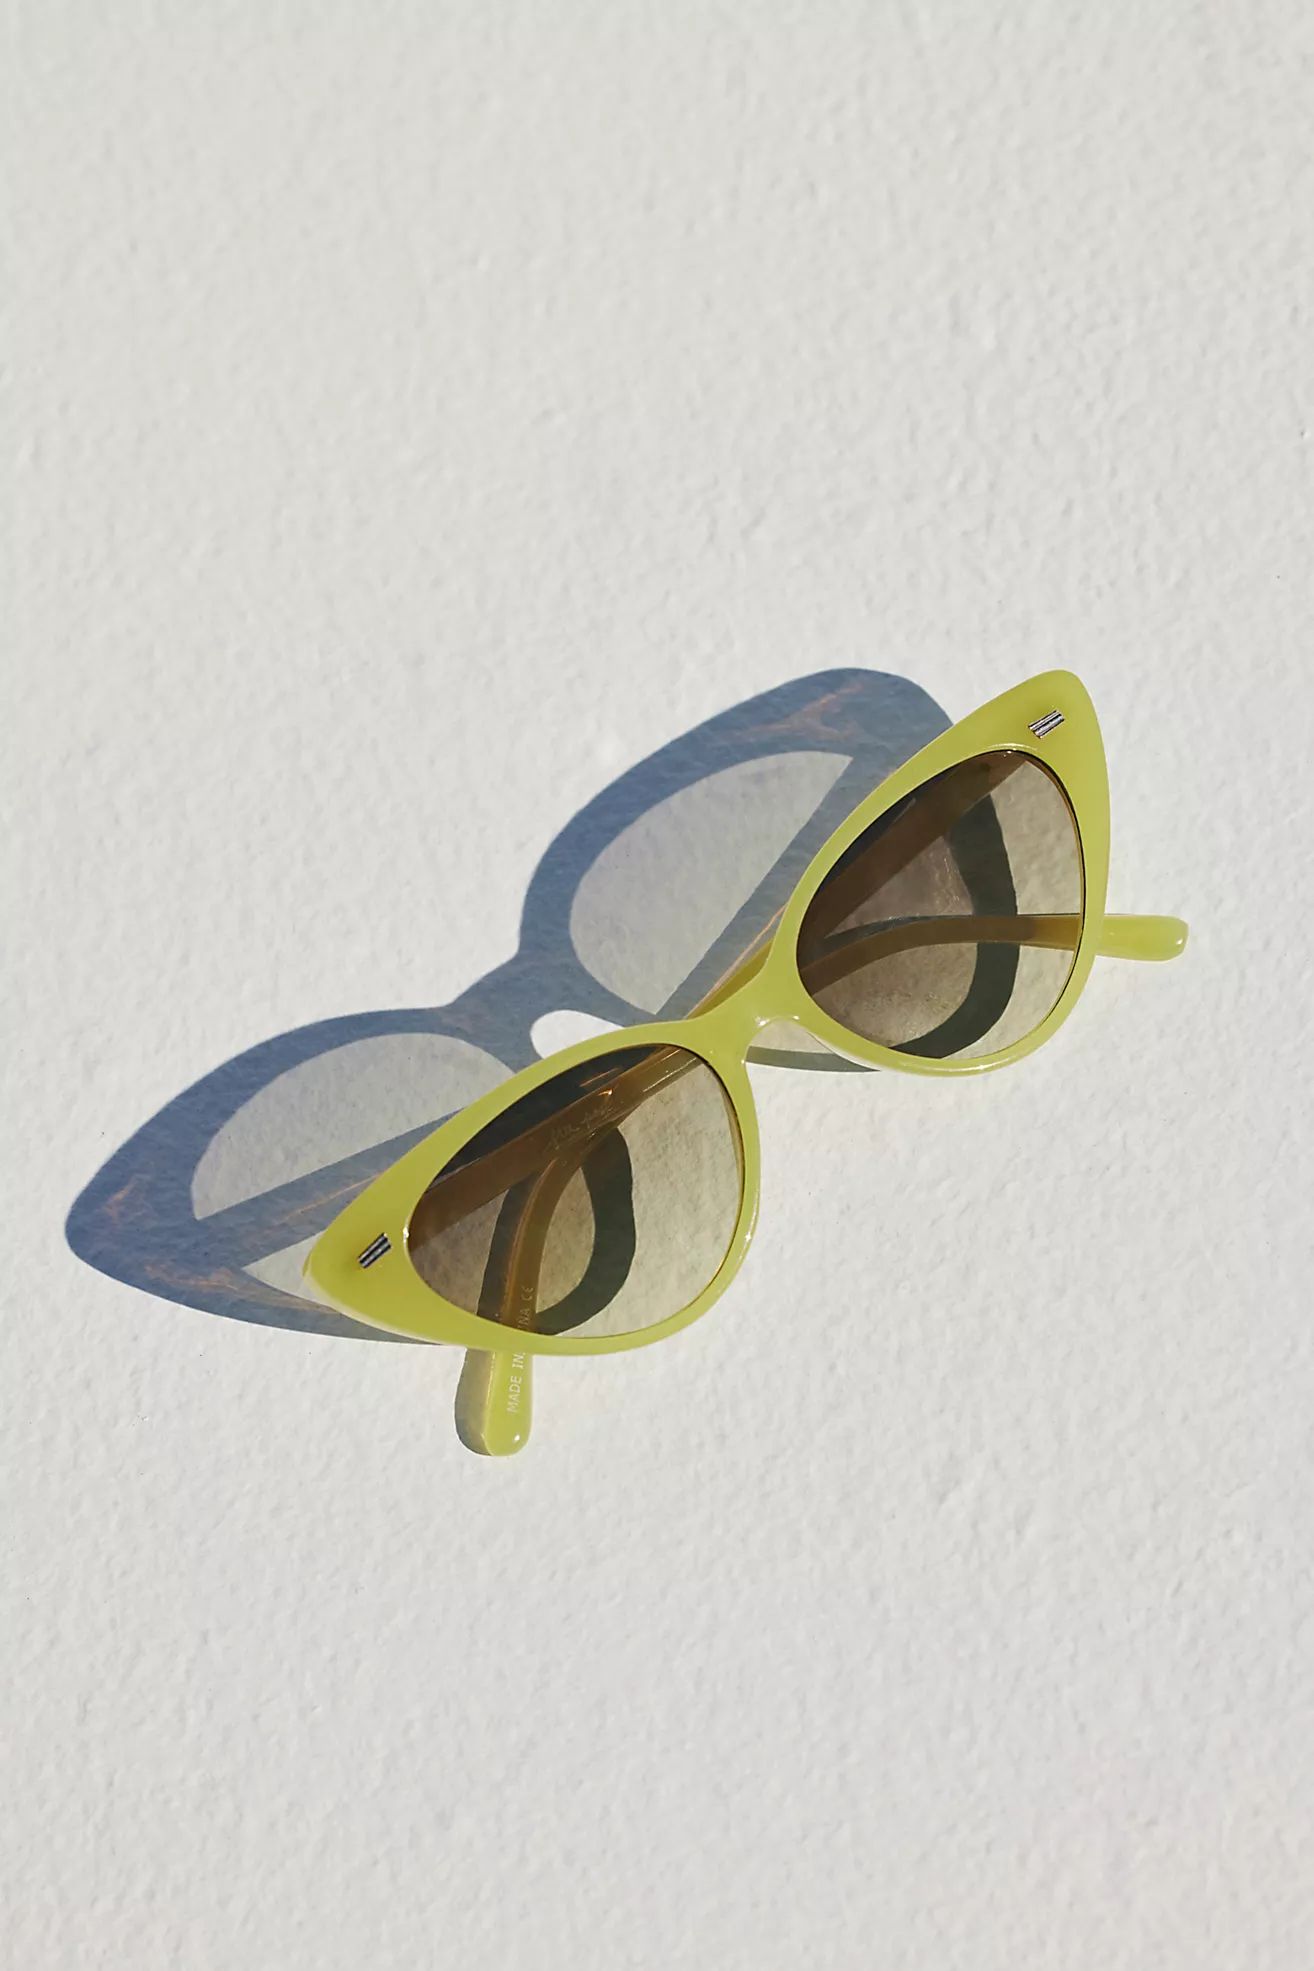 Olympic Cat Eye Sunglasses | Free People (Global - UK&FR Excluded)